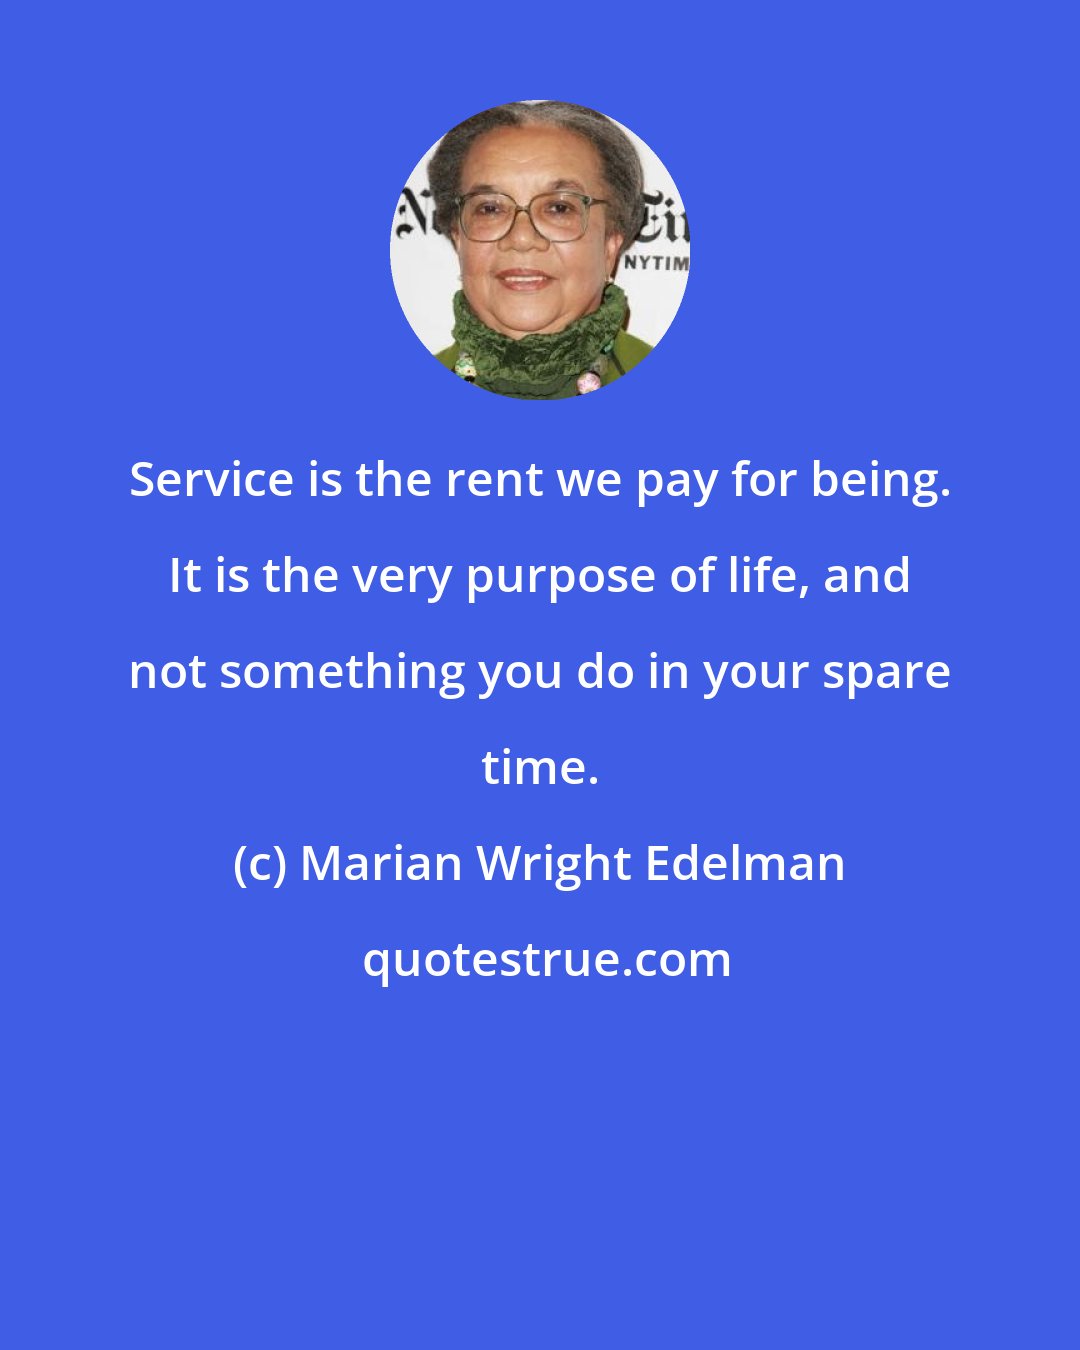 Marian Wright Edelman: Service is the rent we pay for being. It is the very purpose of life, and not something you do in your spare time.